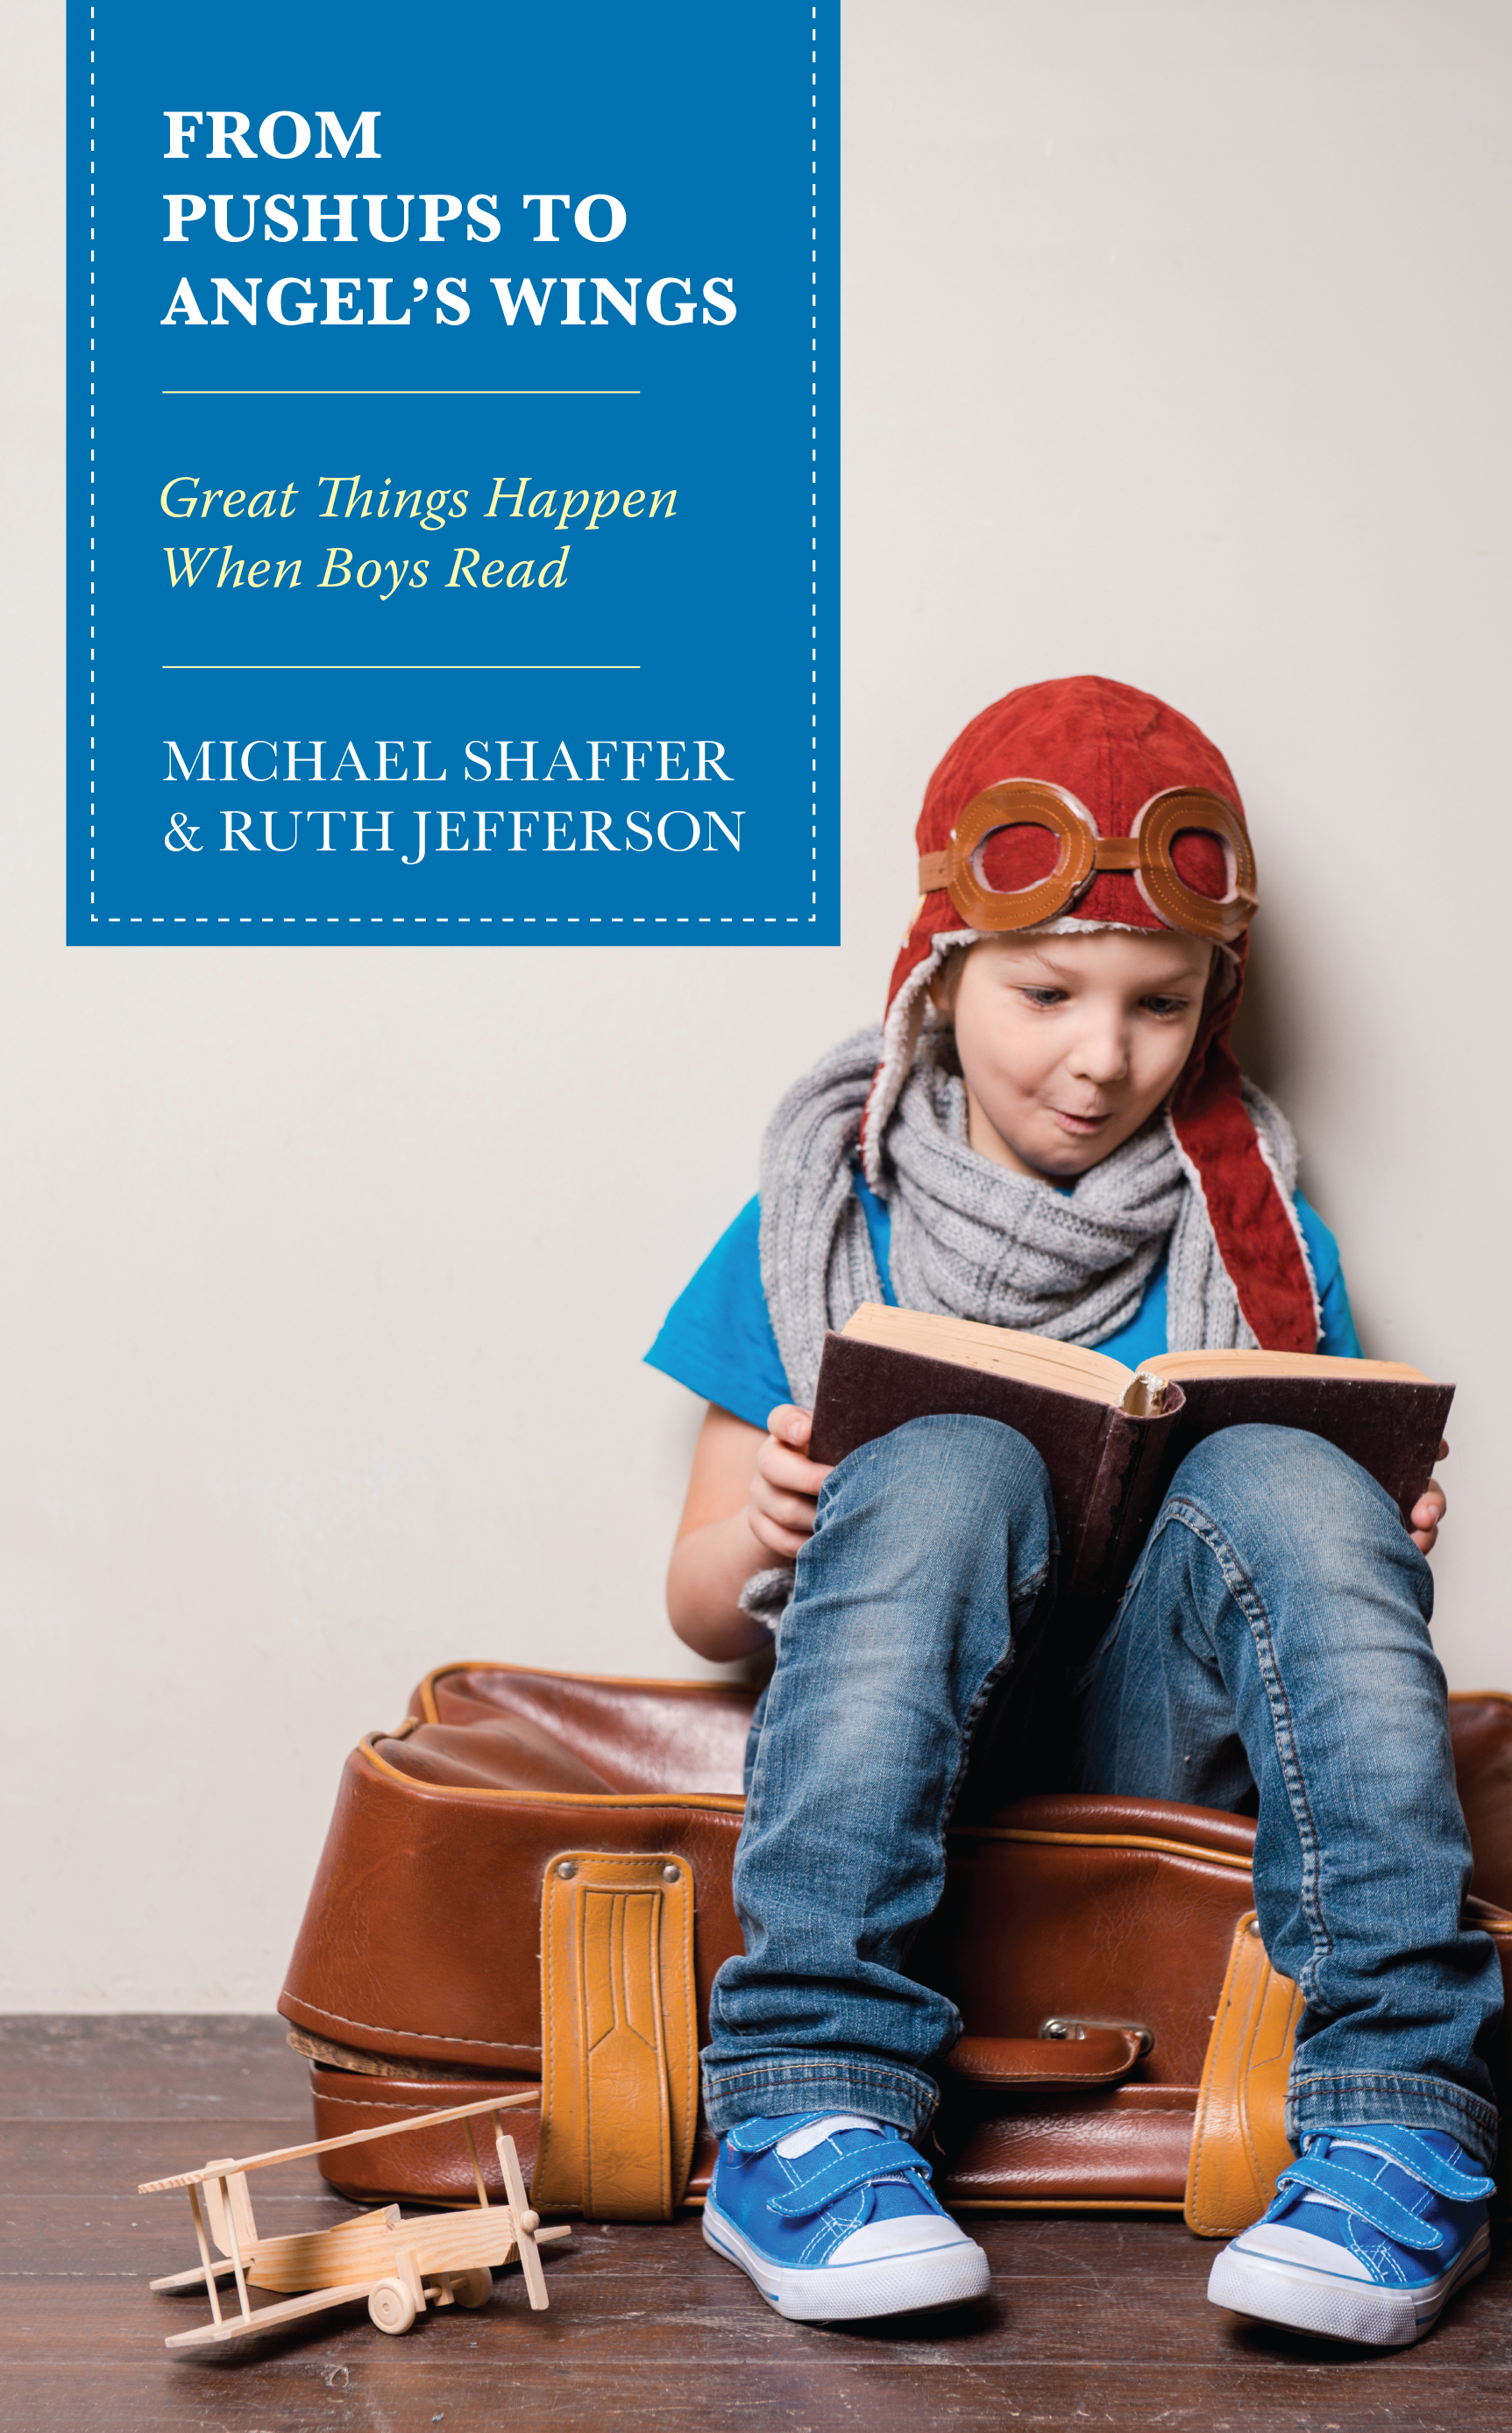 From Pushups to Angel’s Wings: Great Things Happen When Boys Read